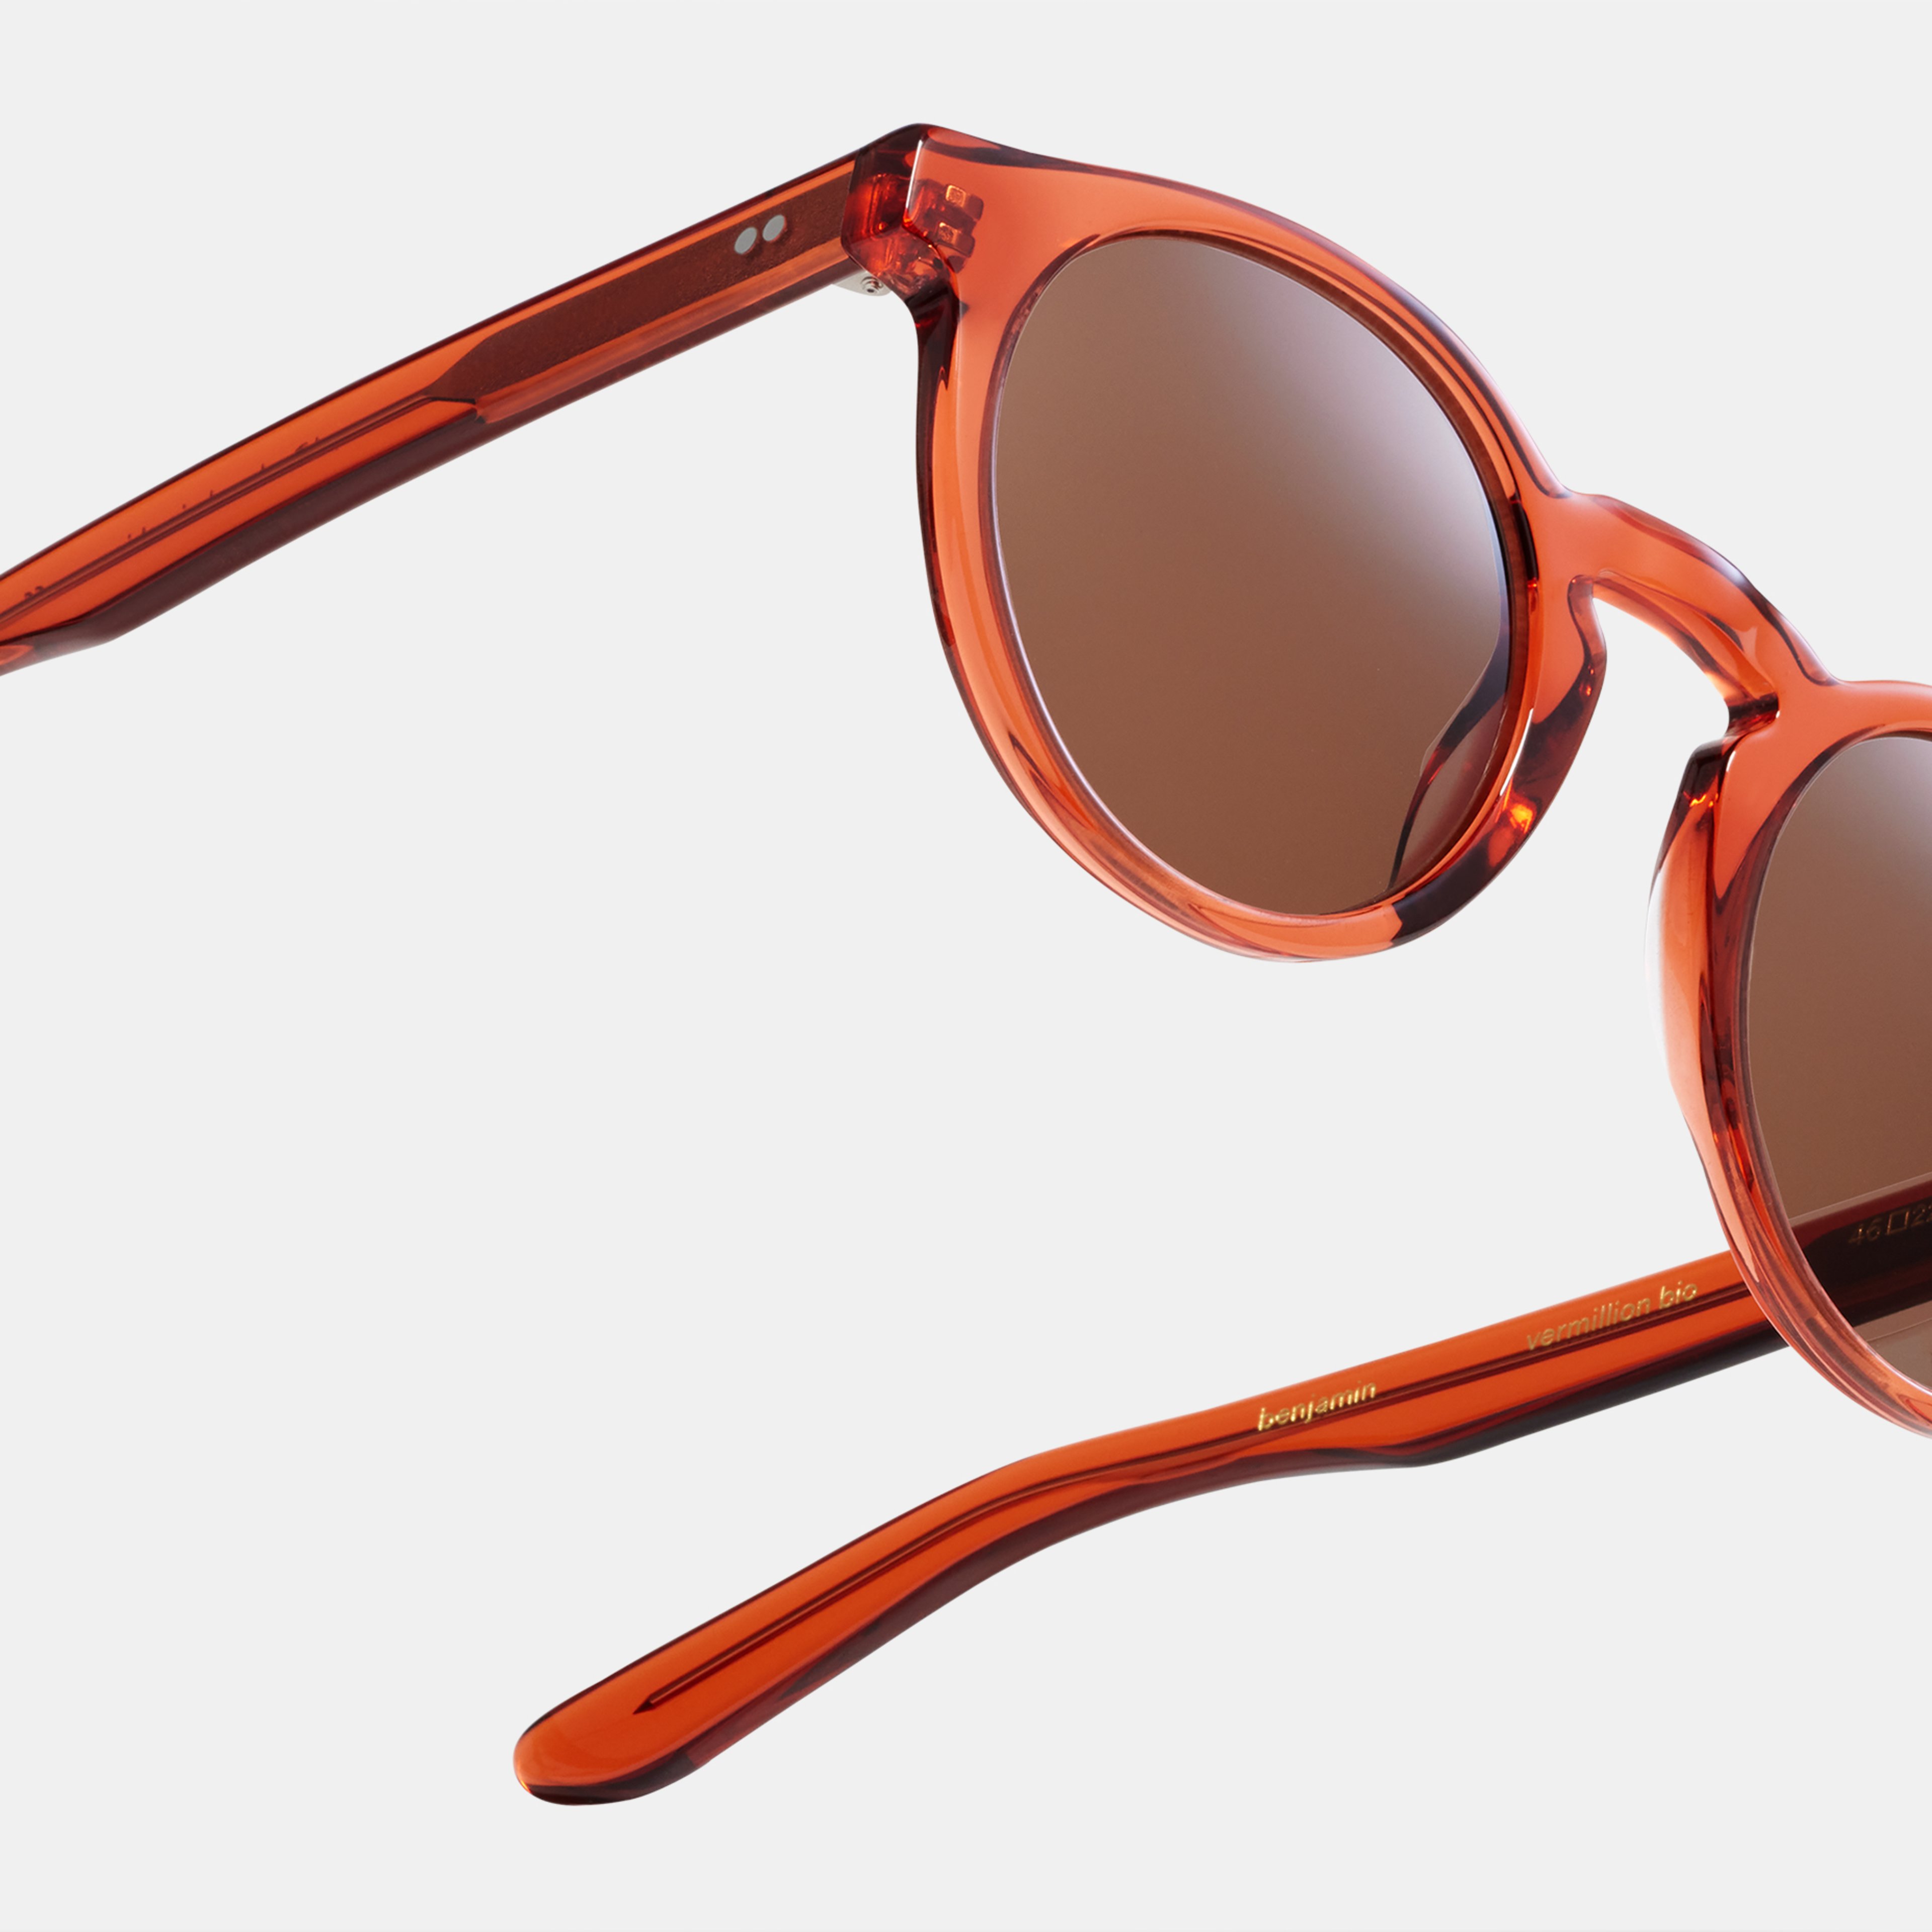 Ace & Tate Zonnebrillen | Rond Renew bio acetate in Rood